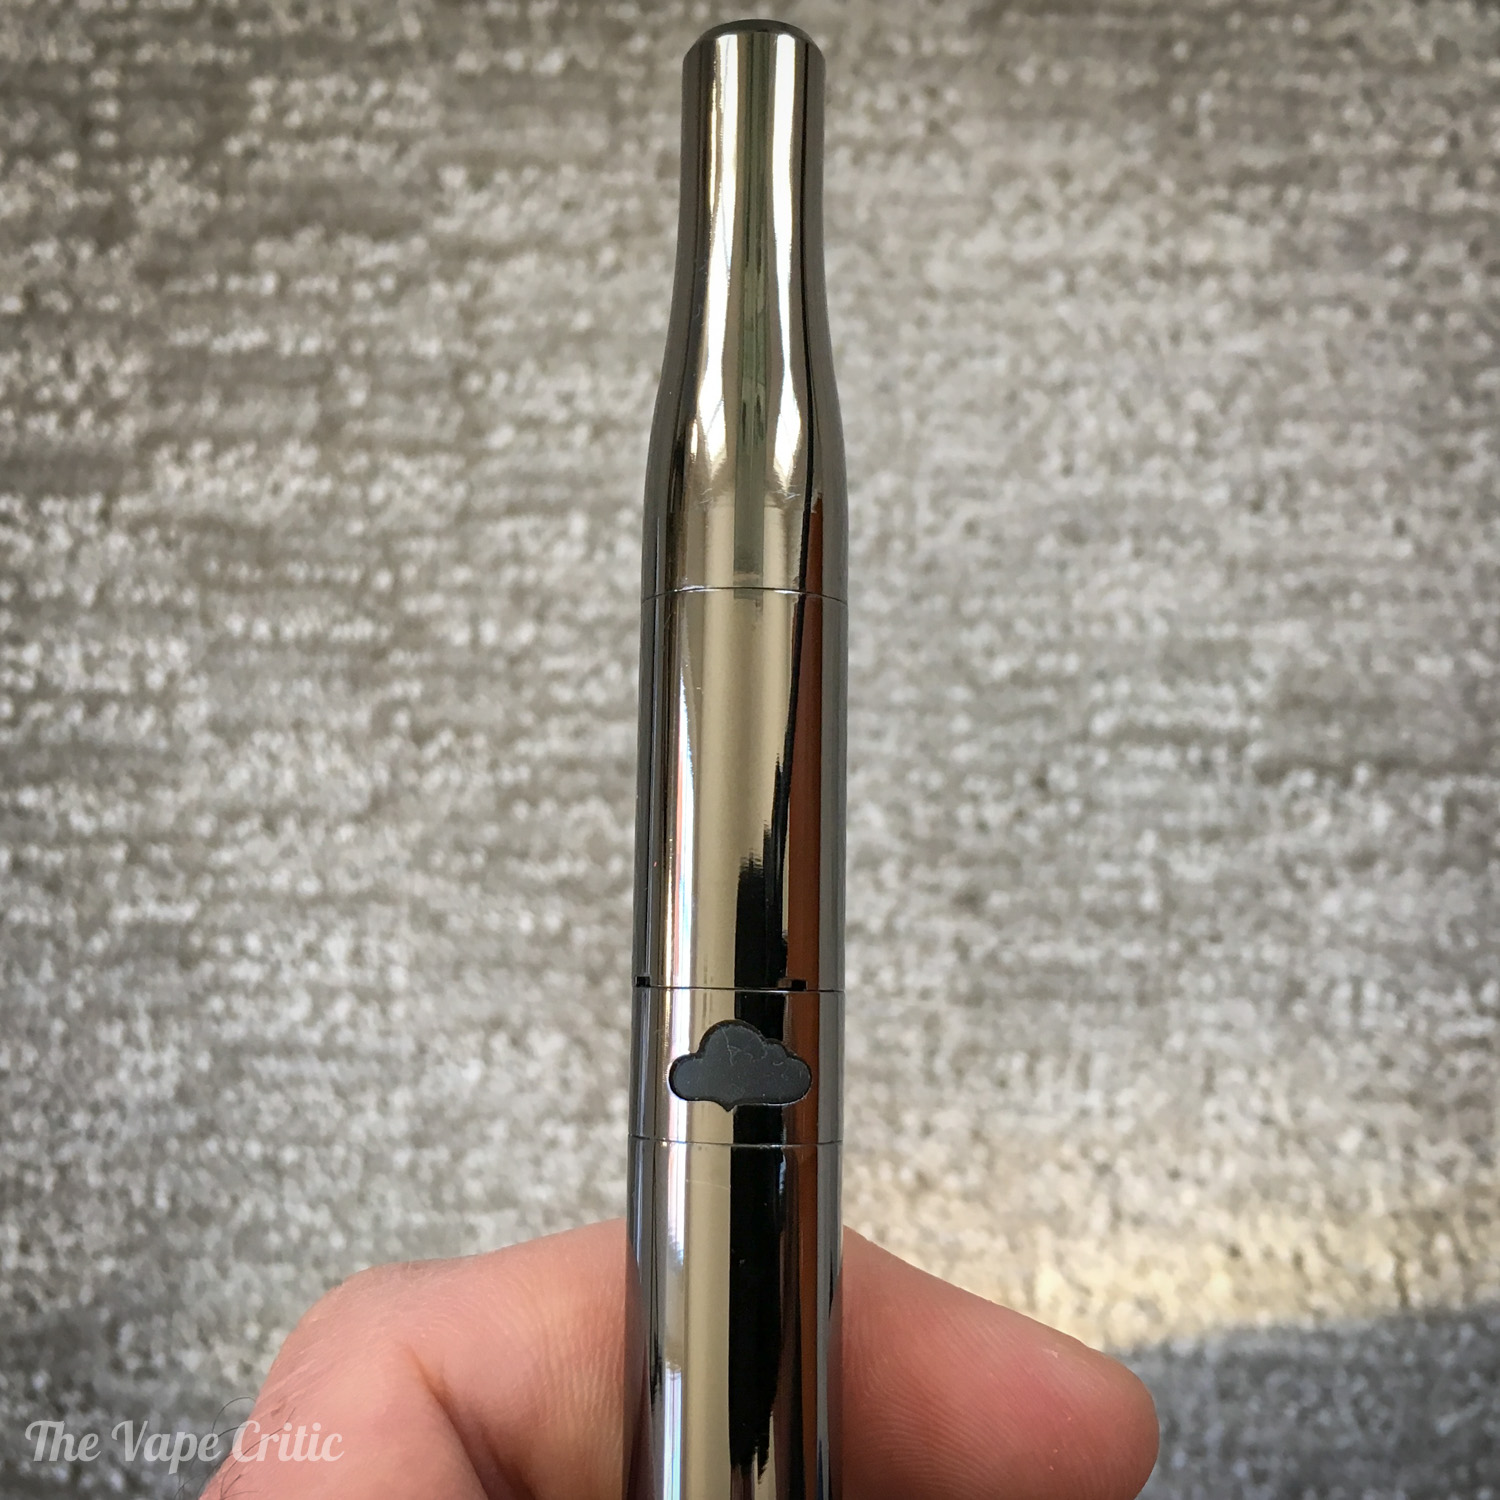 V3 atomizer damages Original Peak- I've seen a few people posting issues  with the V3 atty showing rainbow lights. V3 atty also WAY hotter than  before. Puffco customer service is a joke